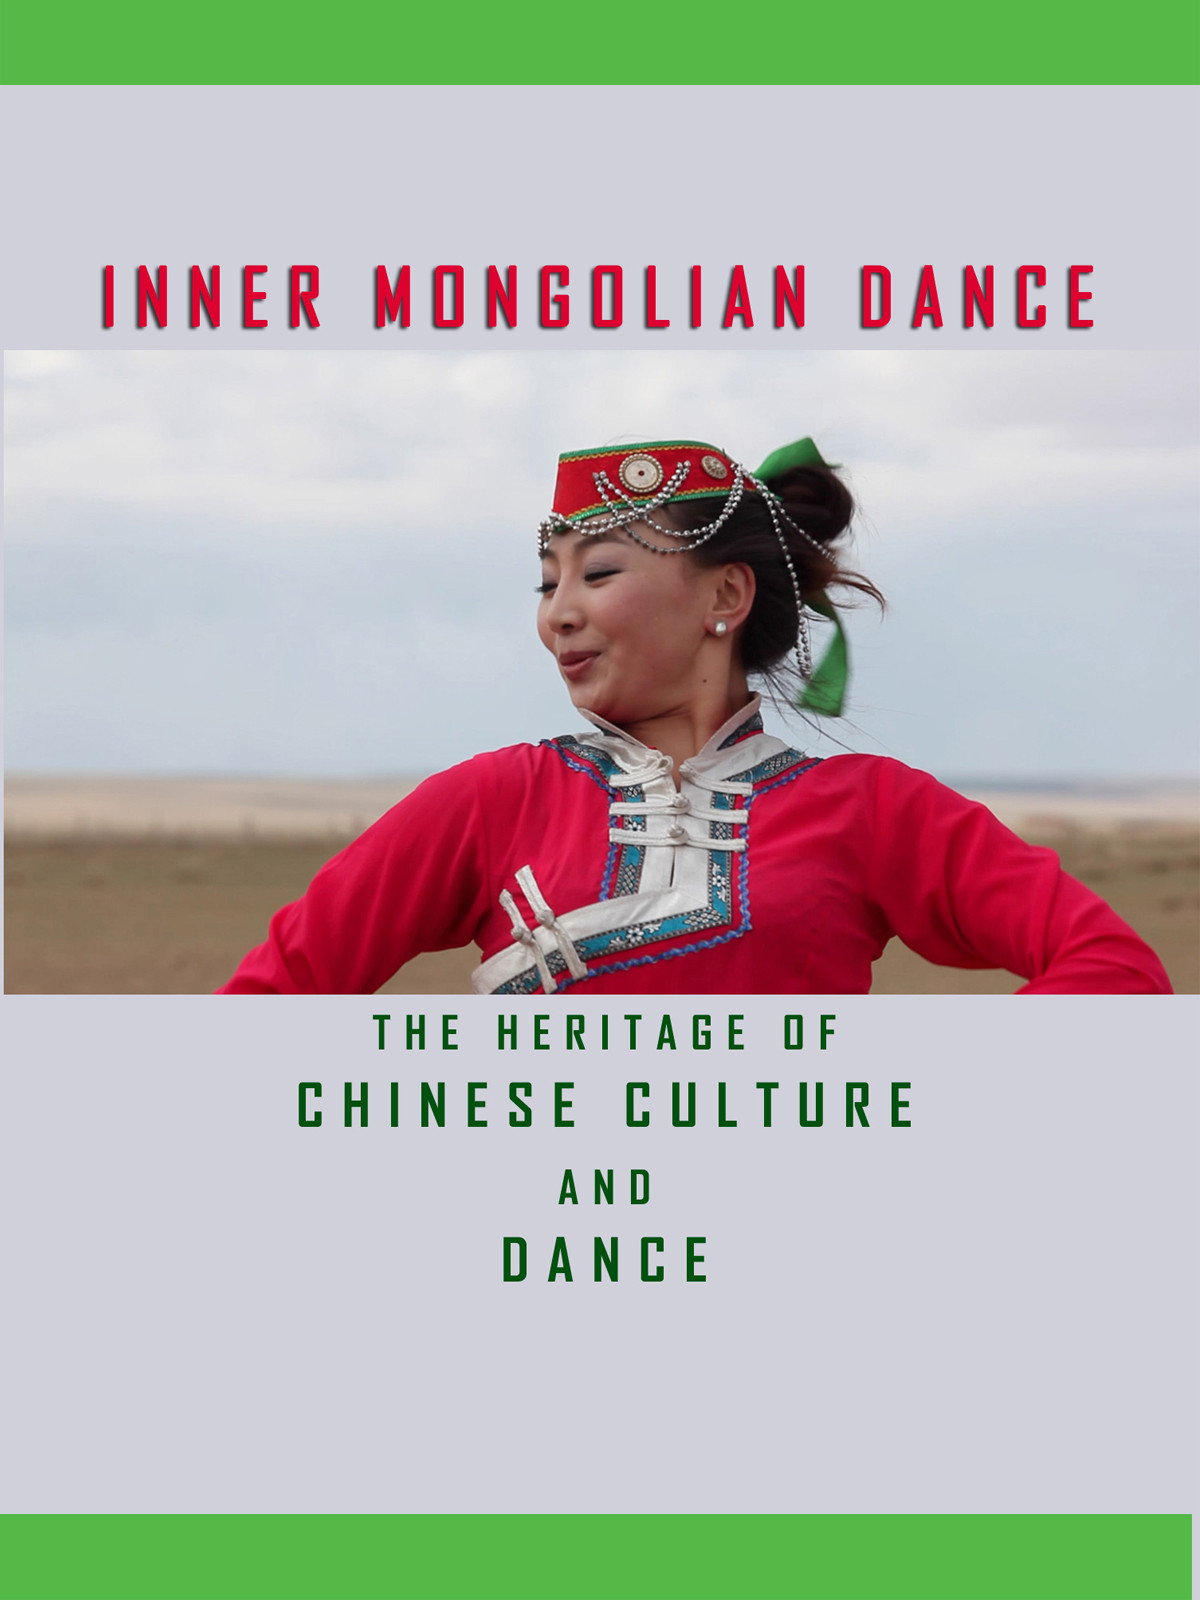 T8926 - The Heritage of Chinese Culture and Dance Ethnic Dance-Inner Mongolian